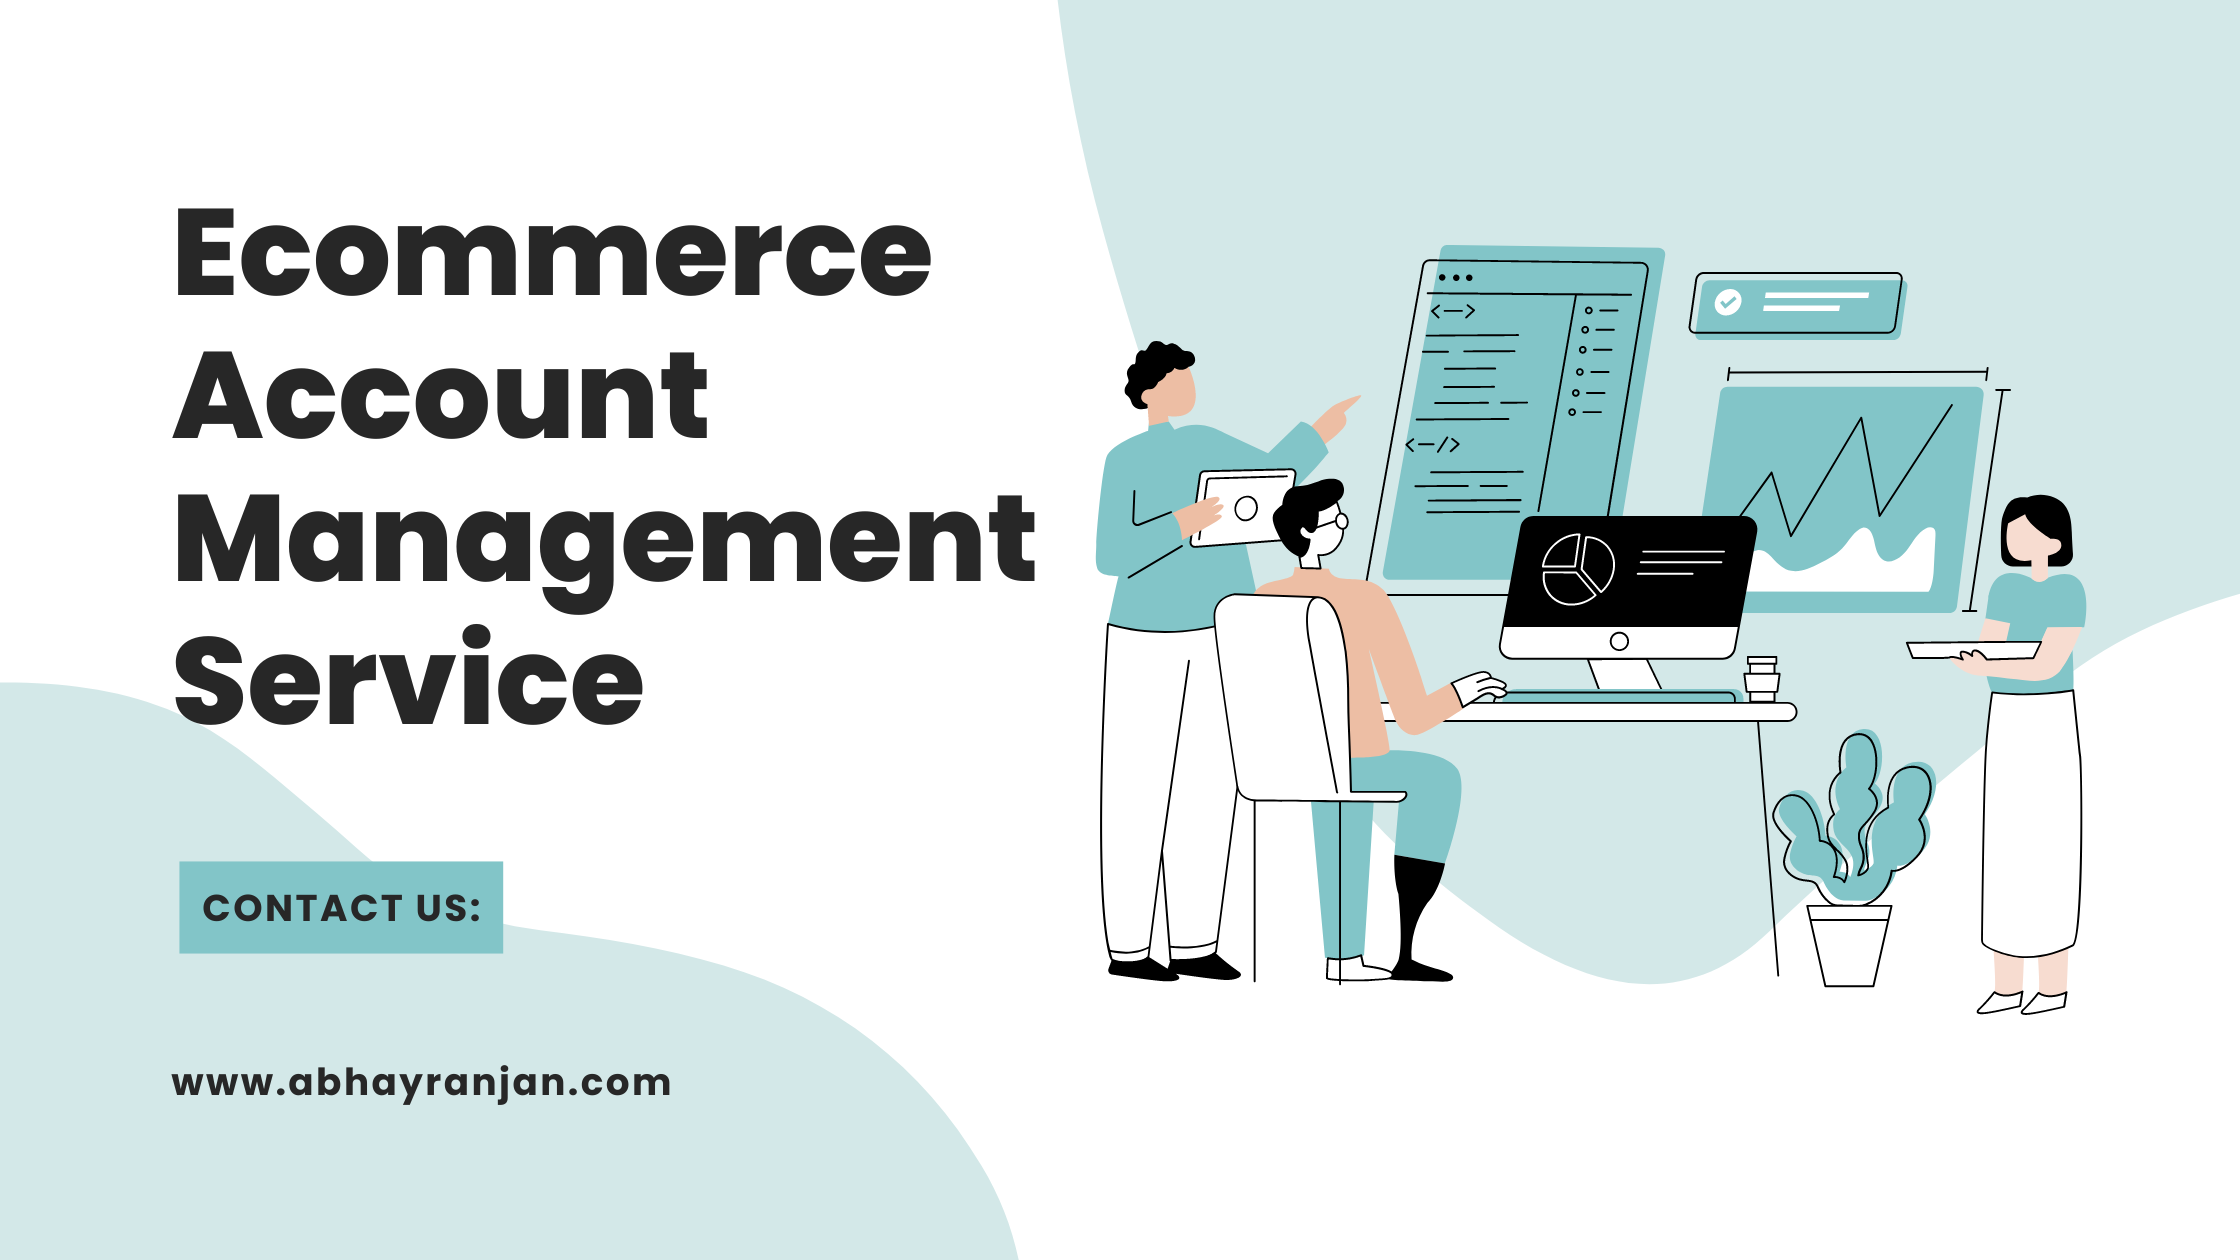 Ecommerce Account Management Service in Jaipur